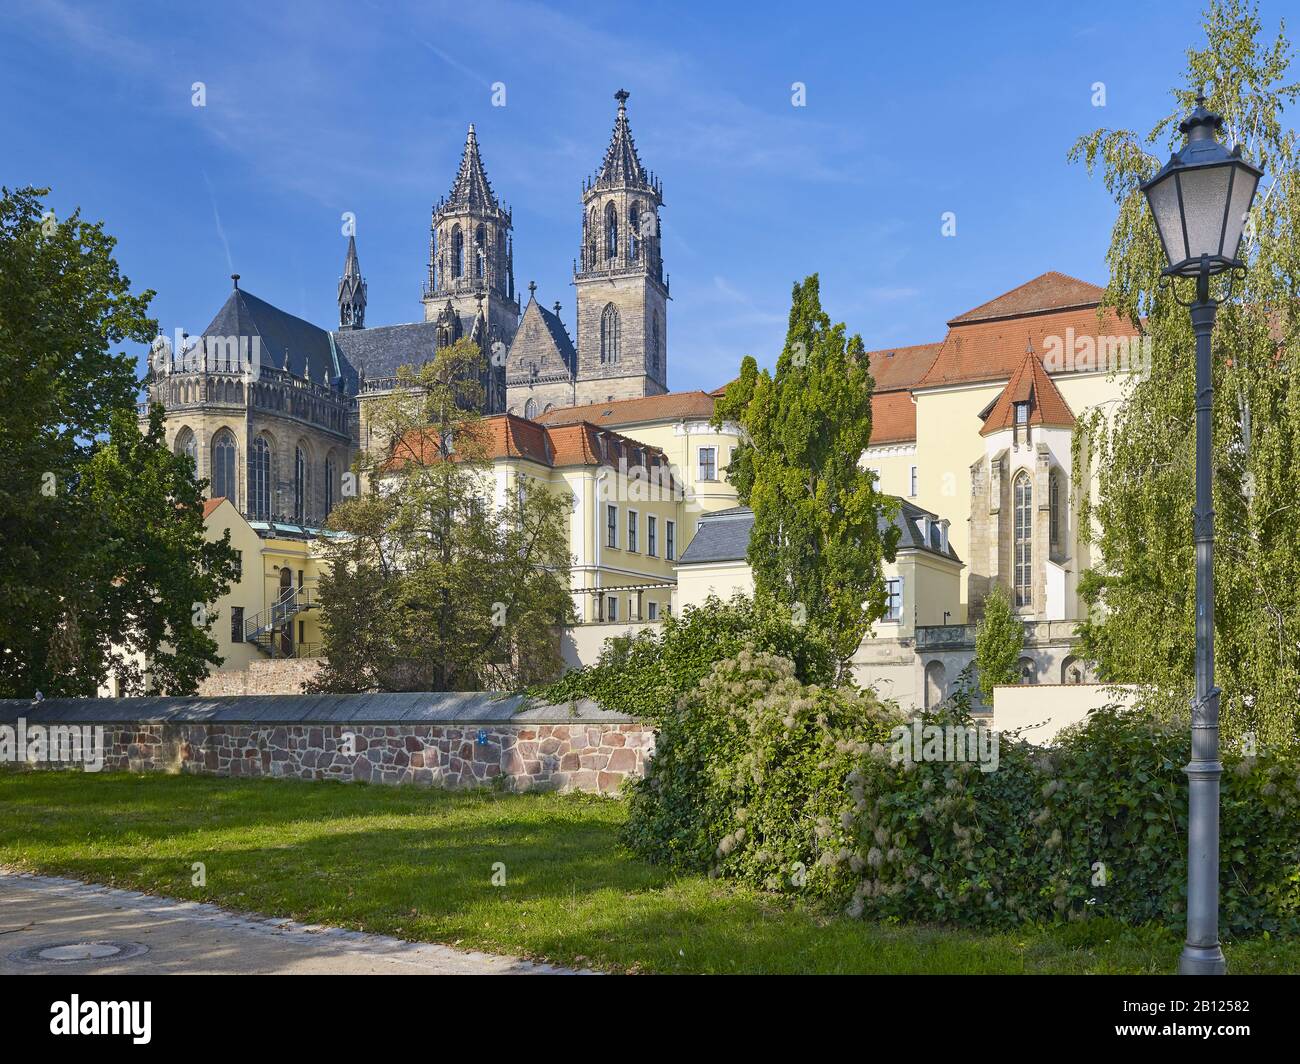 View from Fürstenwall to Magdeburg Cathedral, Magdeburg, Saxony-Anhalt, Germany Stock Photo